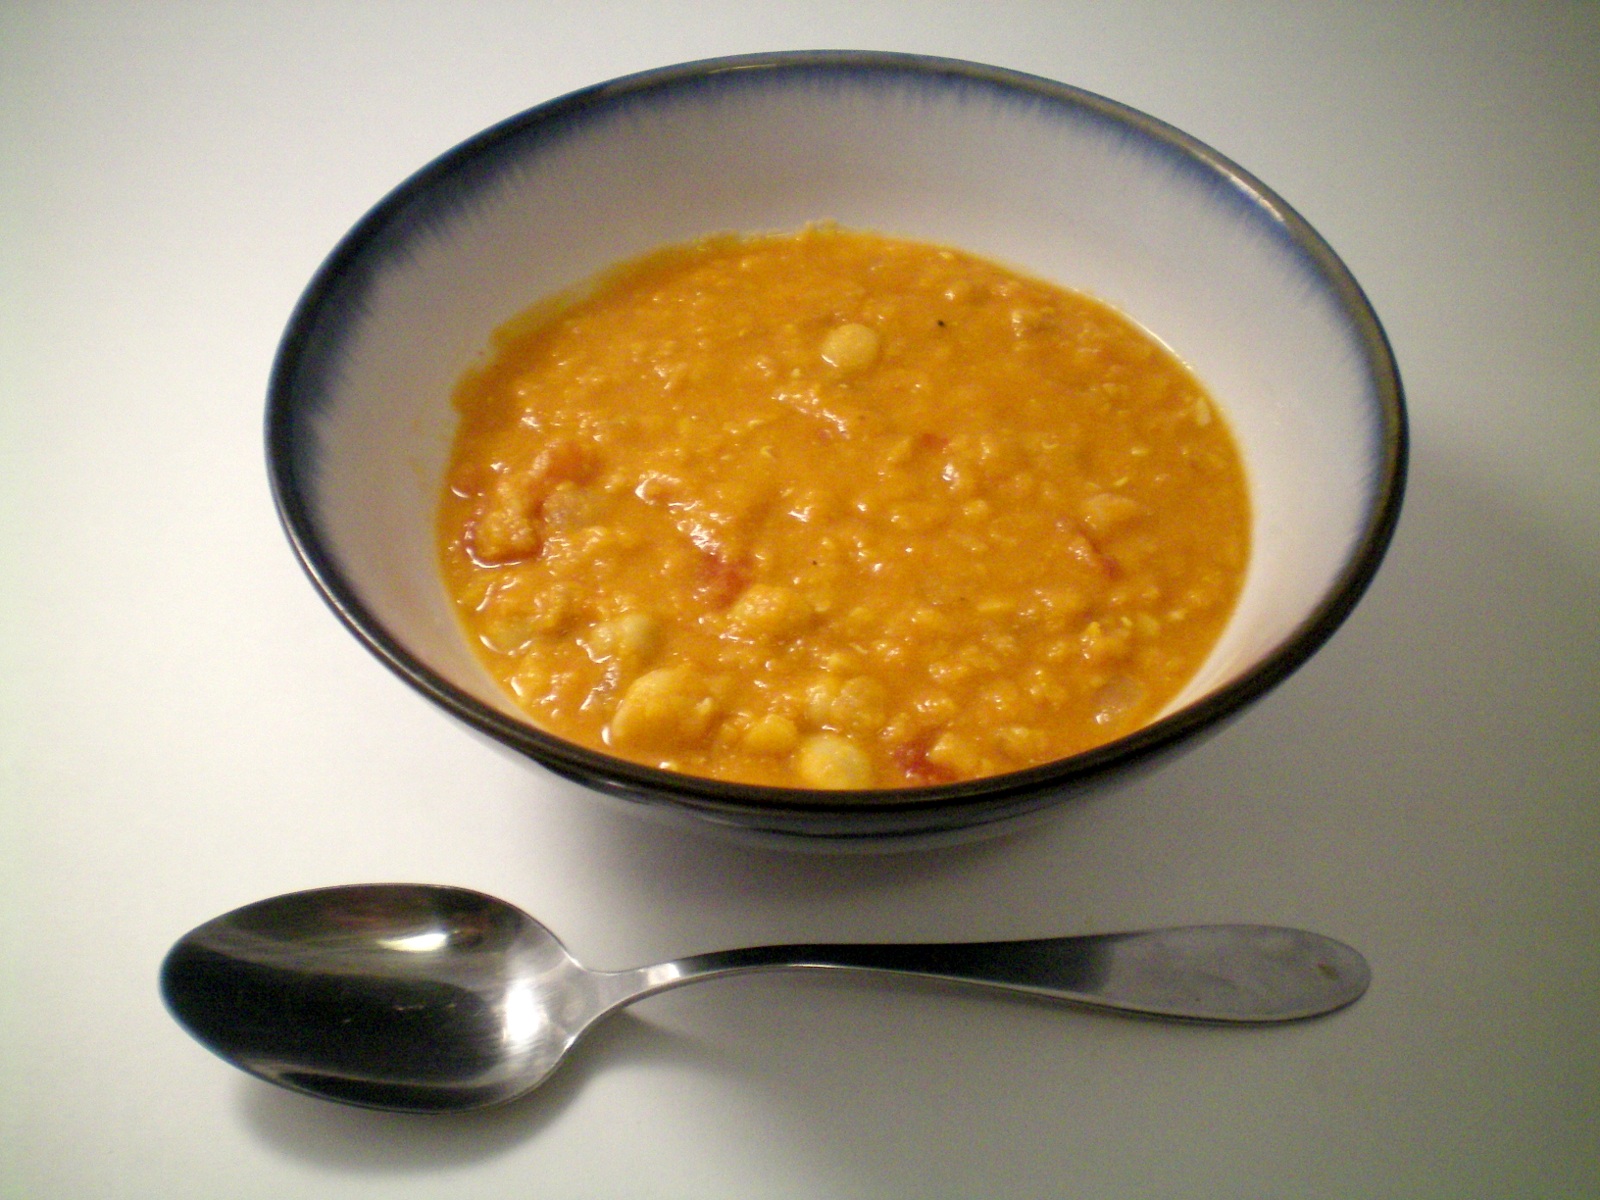 chickpea and red lentil soup